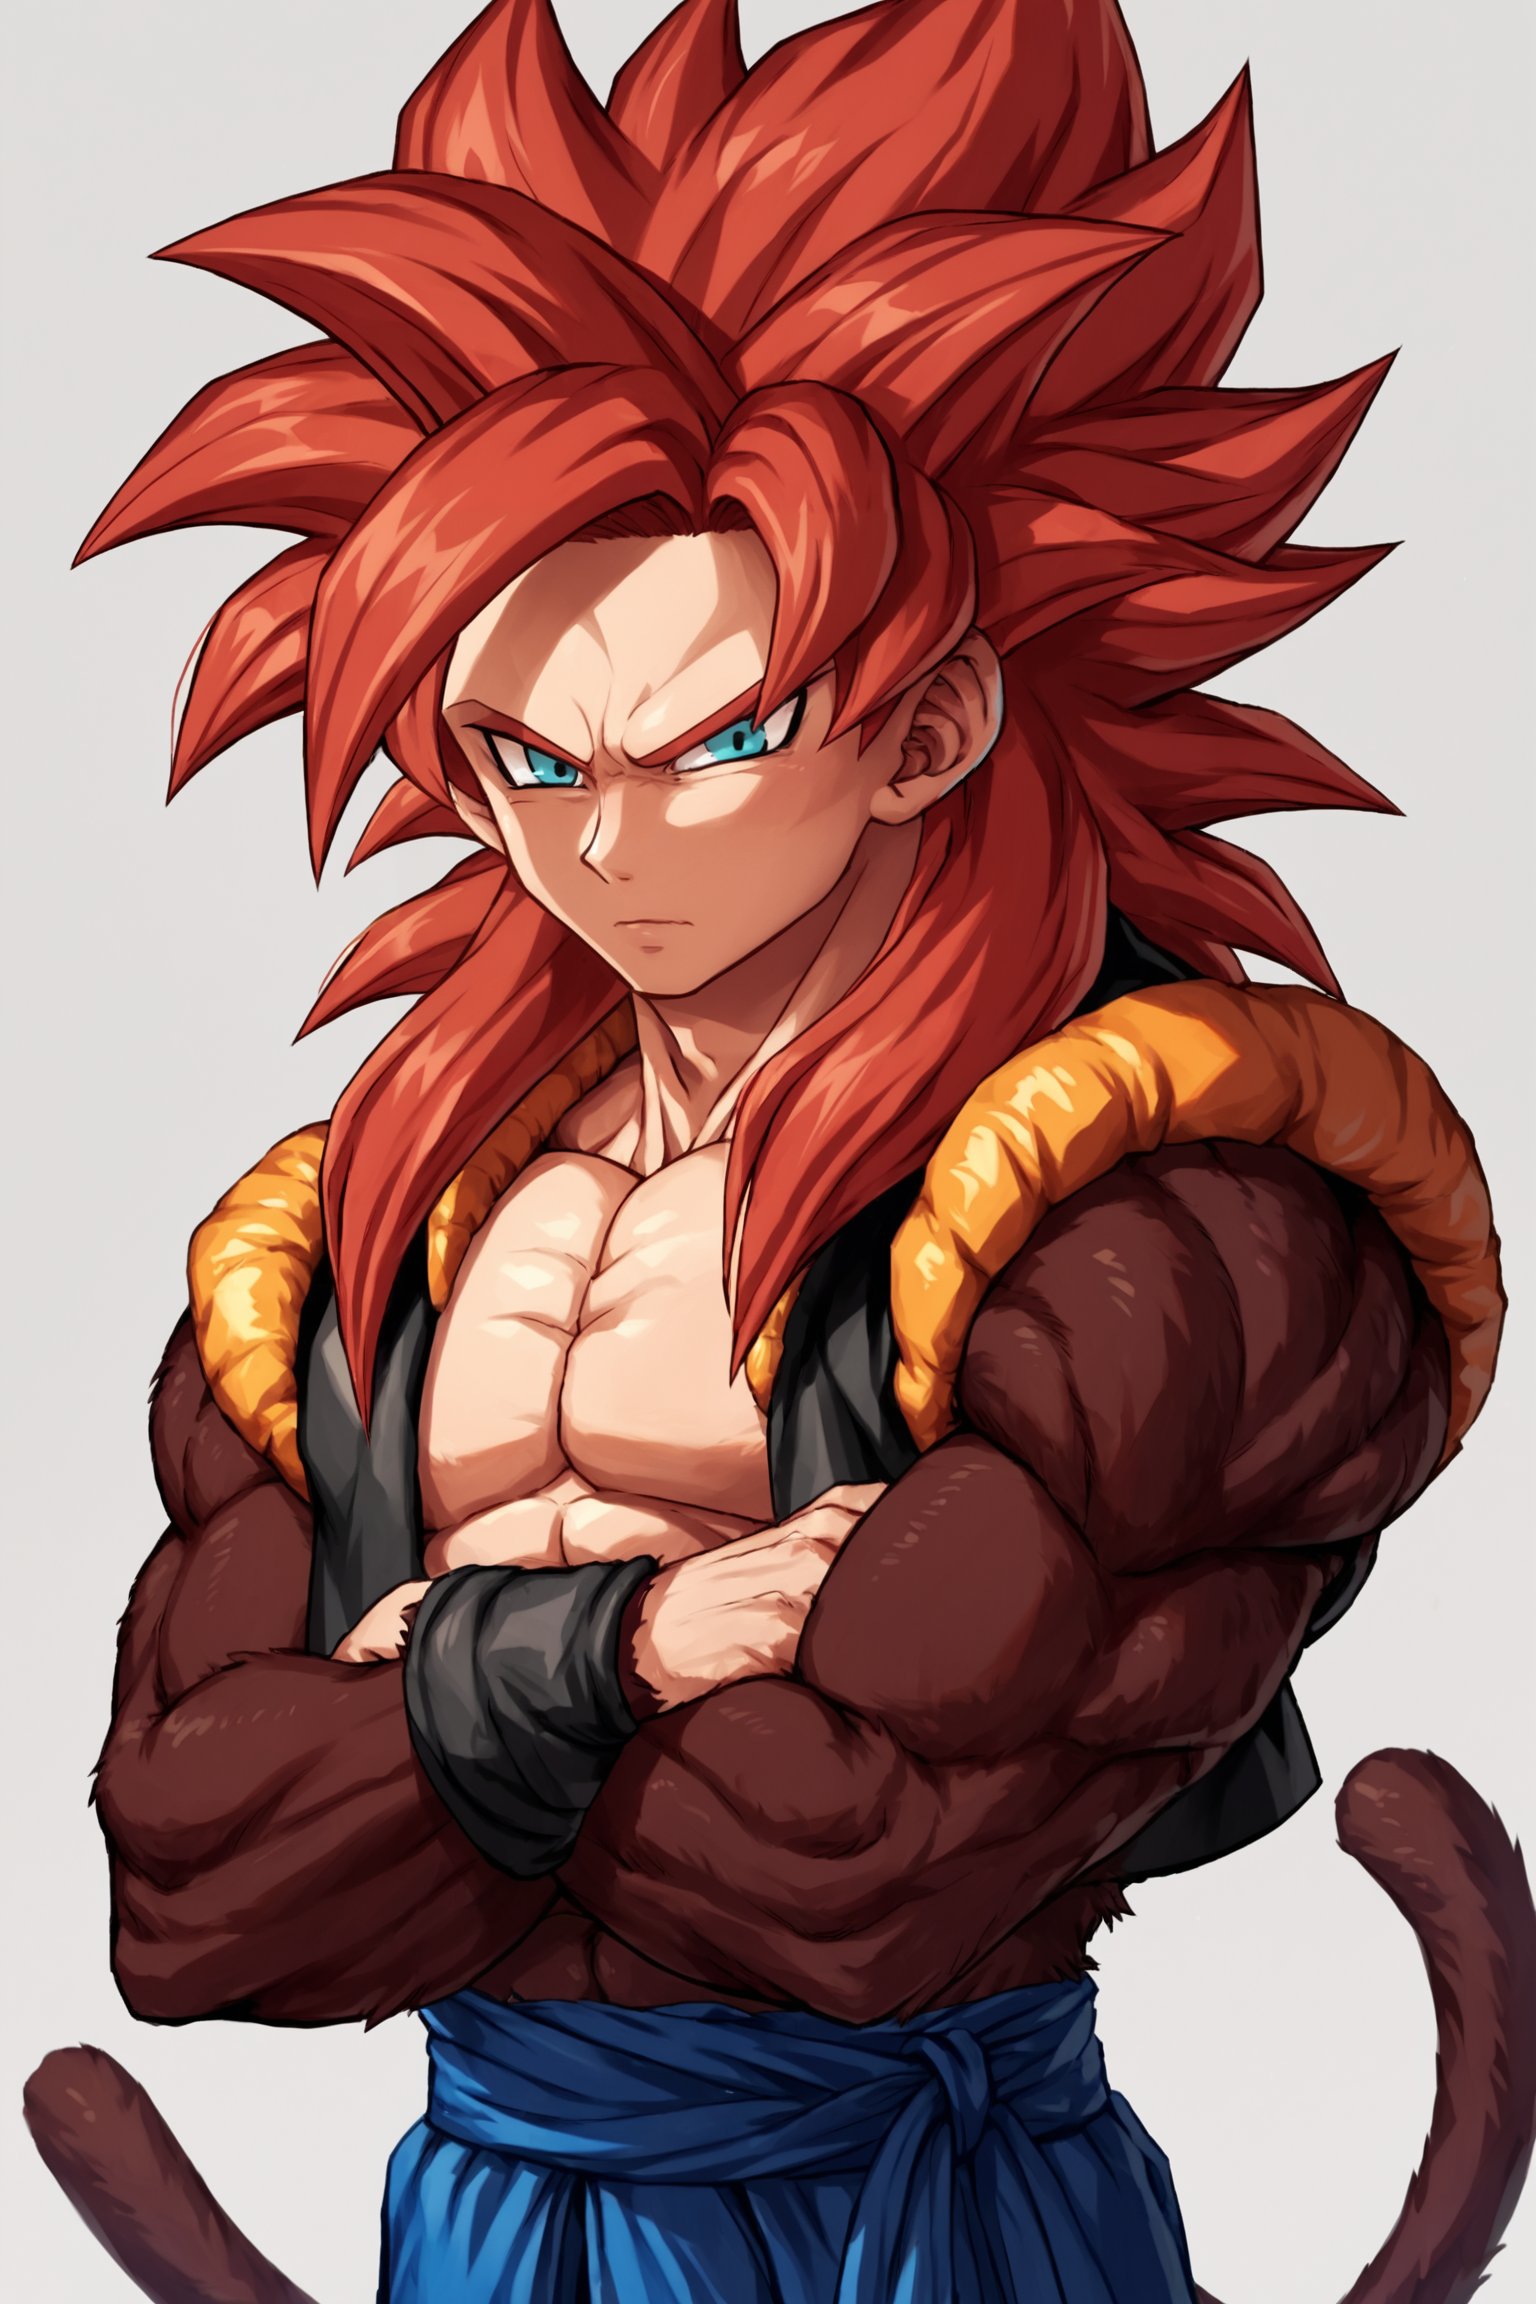 score_9, score_8_up, score_7_up, score_6_up, score_5_up, score_4_up, gogeta_ssj4, super saiyan, red hair, blue eyes, body fur, spiked hair, monkey tail, solo, muscular male, arms_crossed, looking_at_viewer, source_anime,  rating_questionable, 


,score_9_up